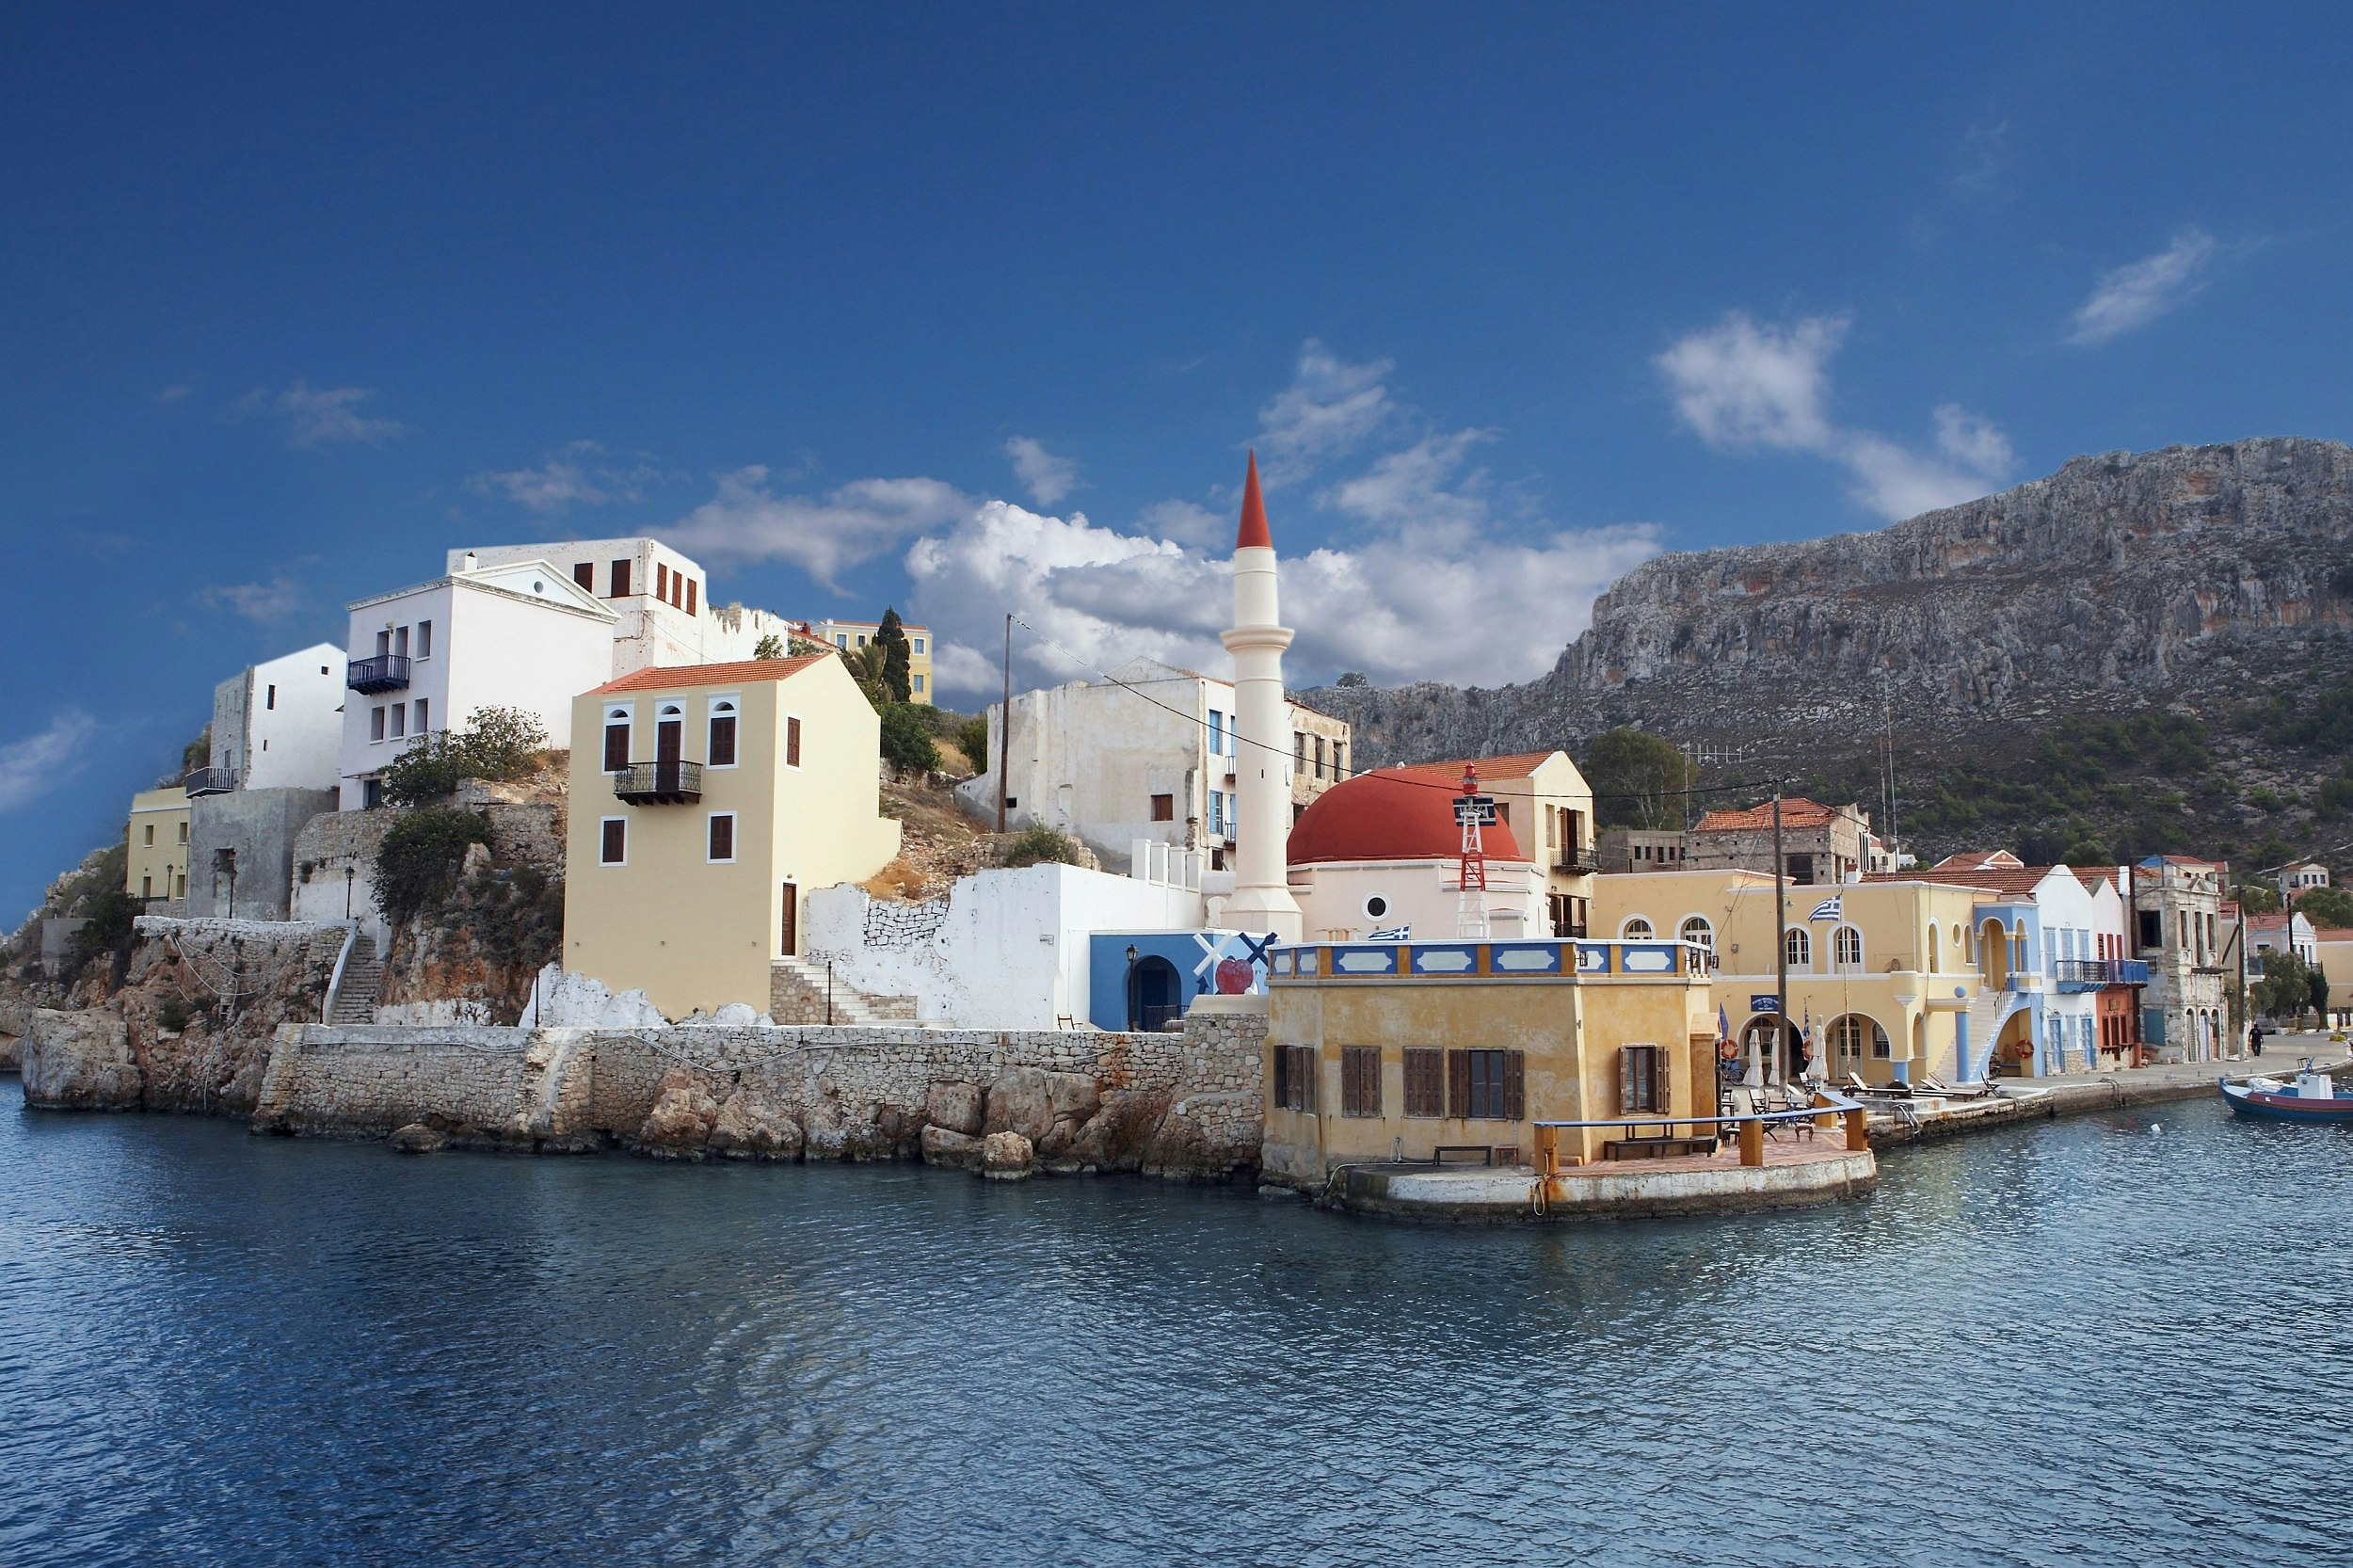 A rocky island lined with pastel-coloured low-rise buildings.